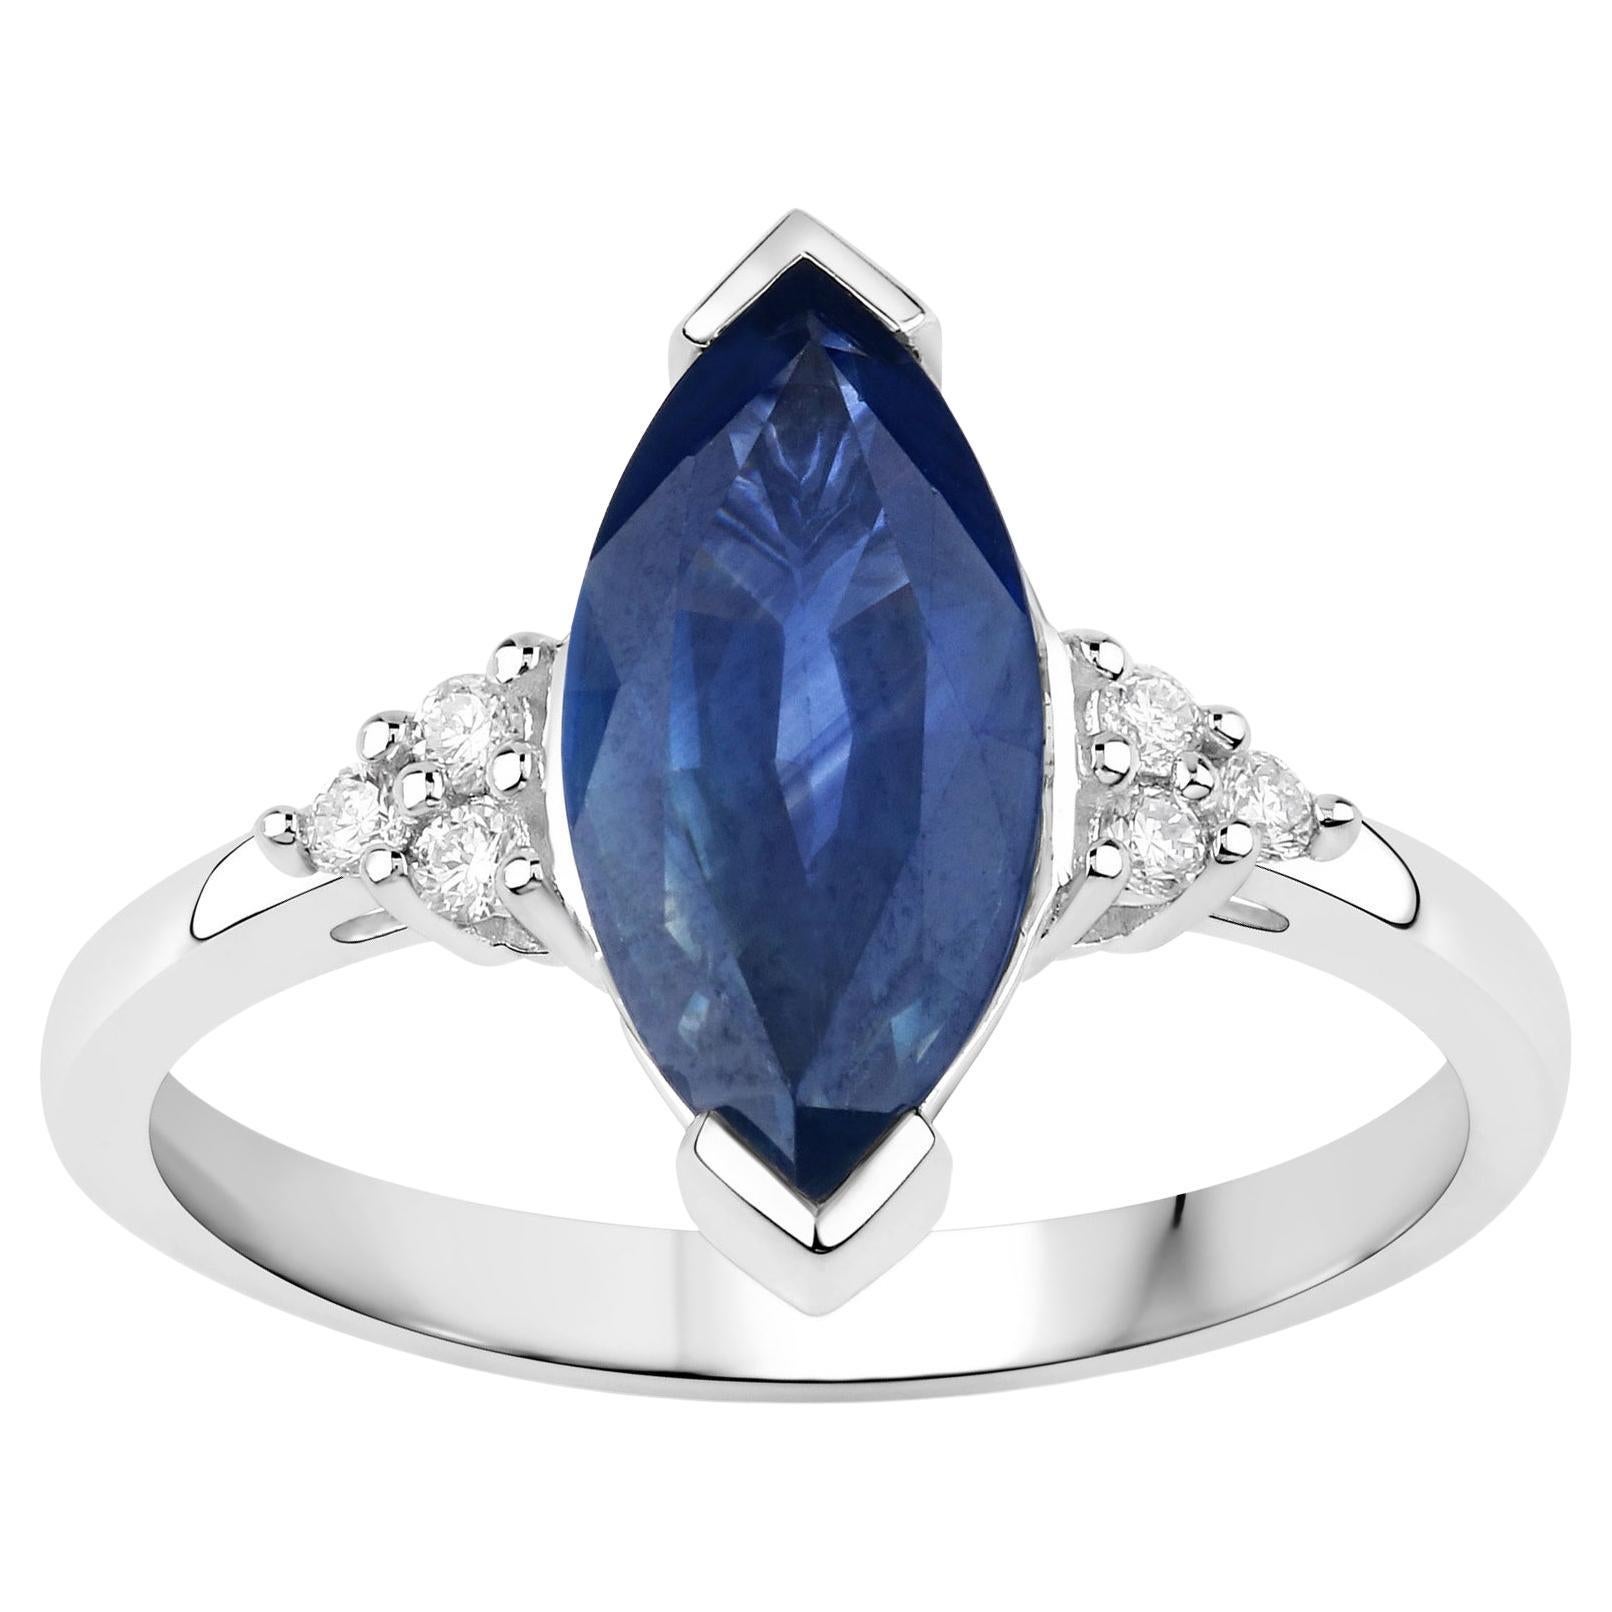 Natural Marquise 4.70 Carat Blue Sapphire and Diamond Ring 14K White Gold In Excellent Condition For Sale In Laguna Niguel, CA